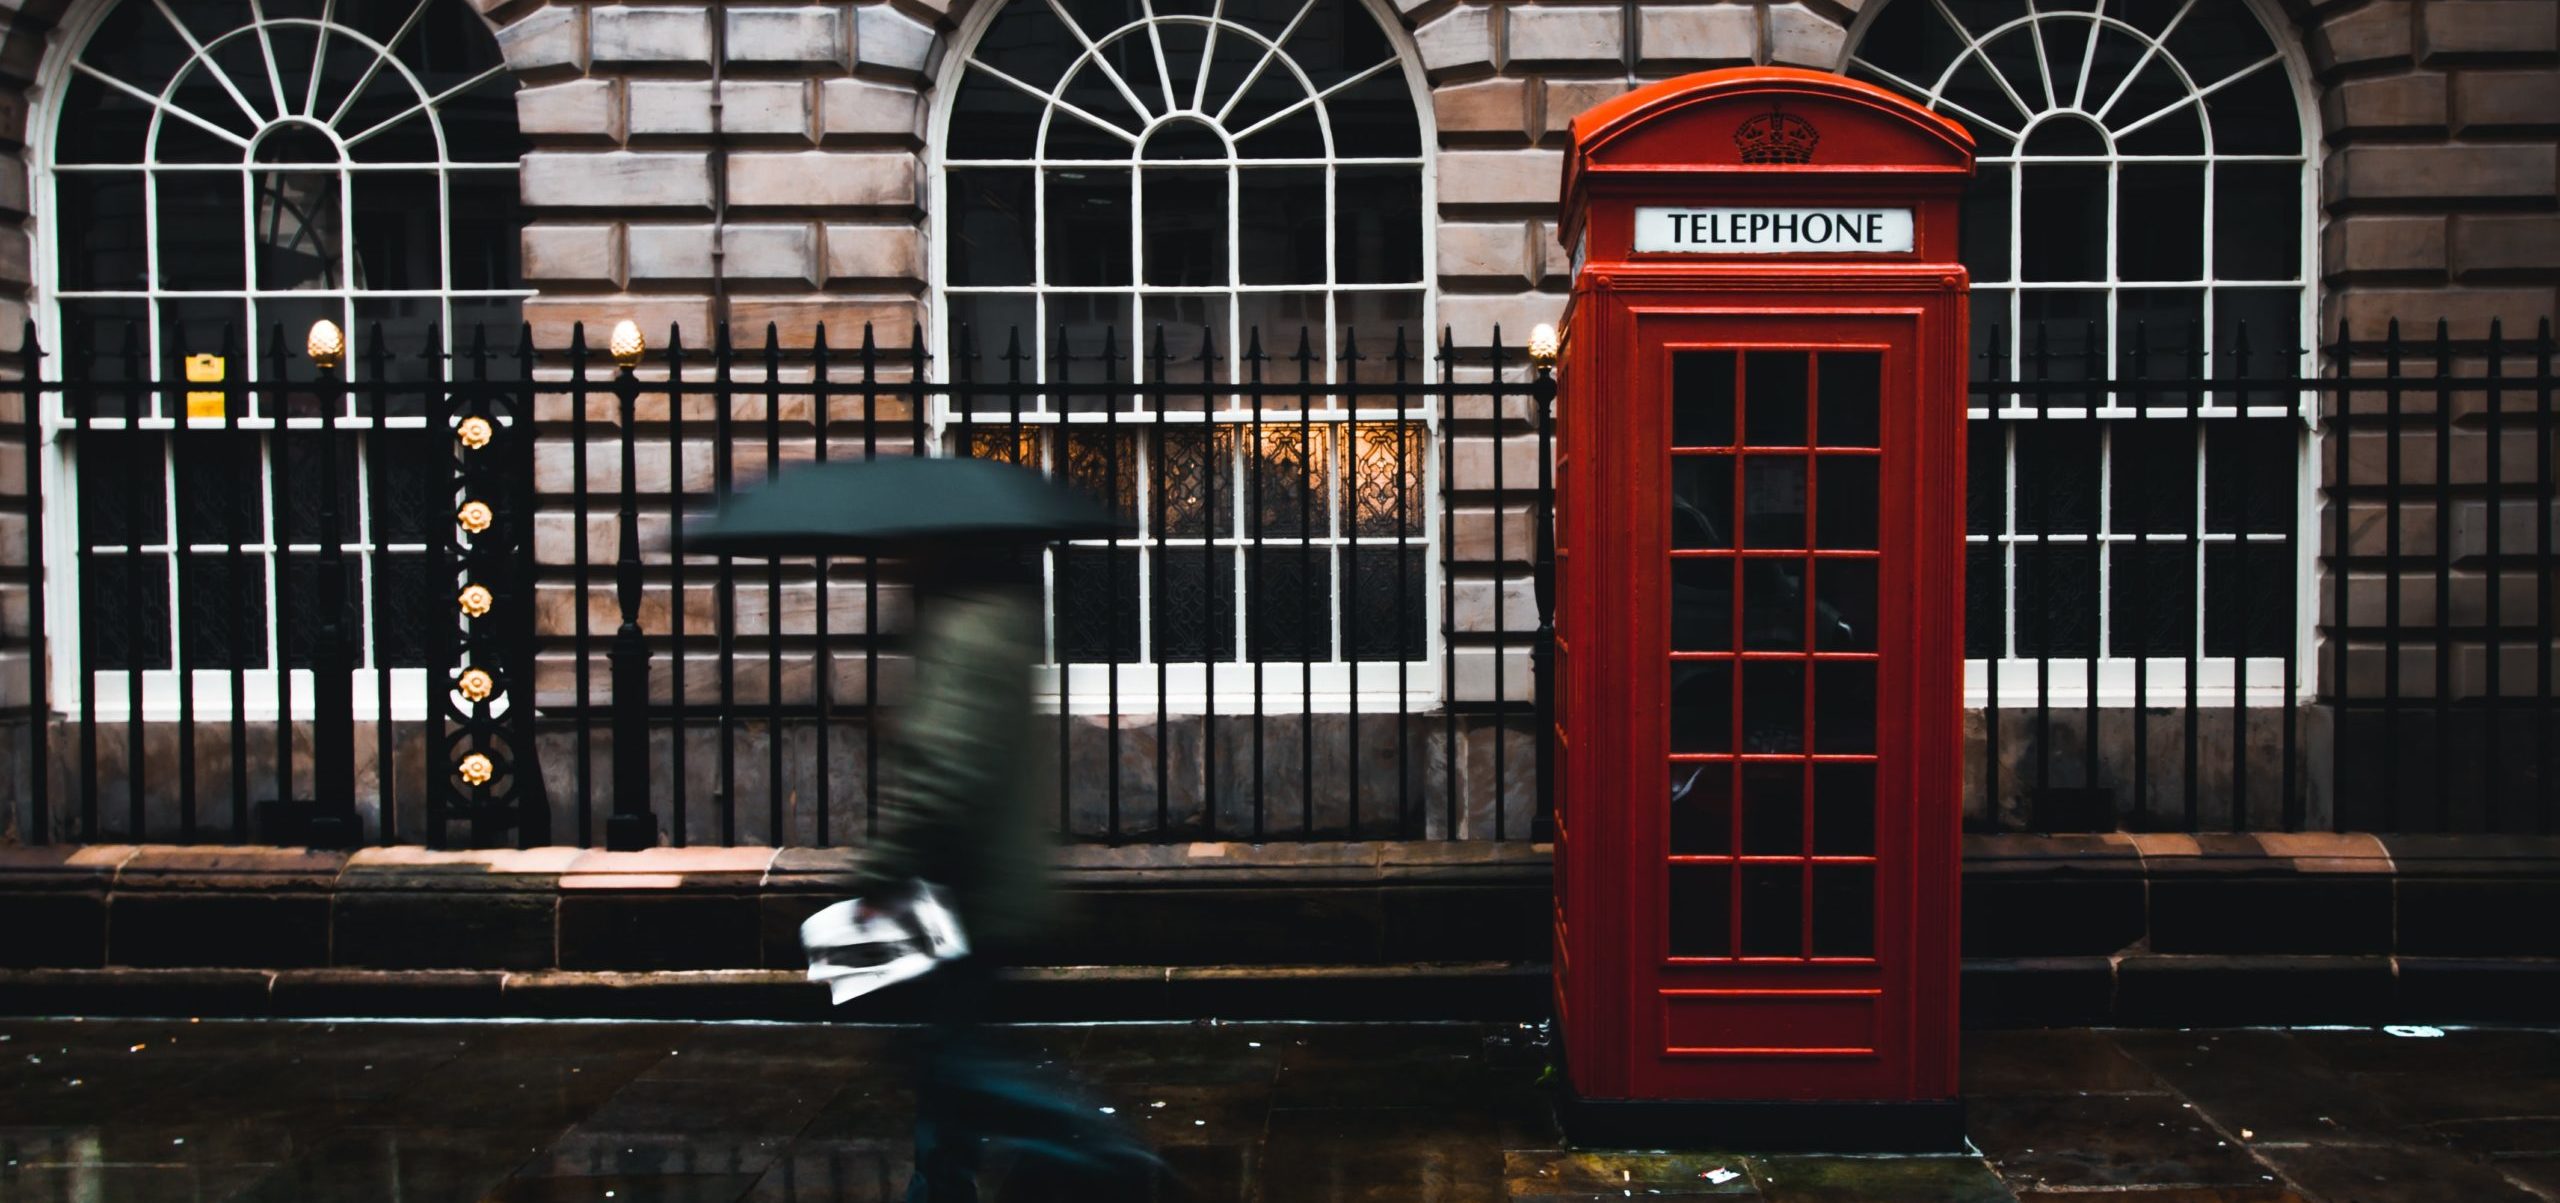 A red, British telephone box on a rainy sidewalk, with large arched windows behind it and a man passing quickly carrying an umbrella.